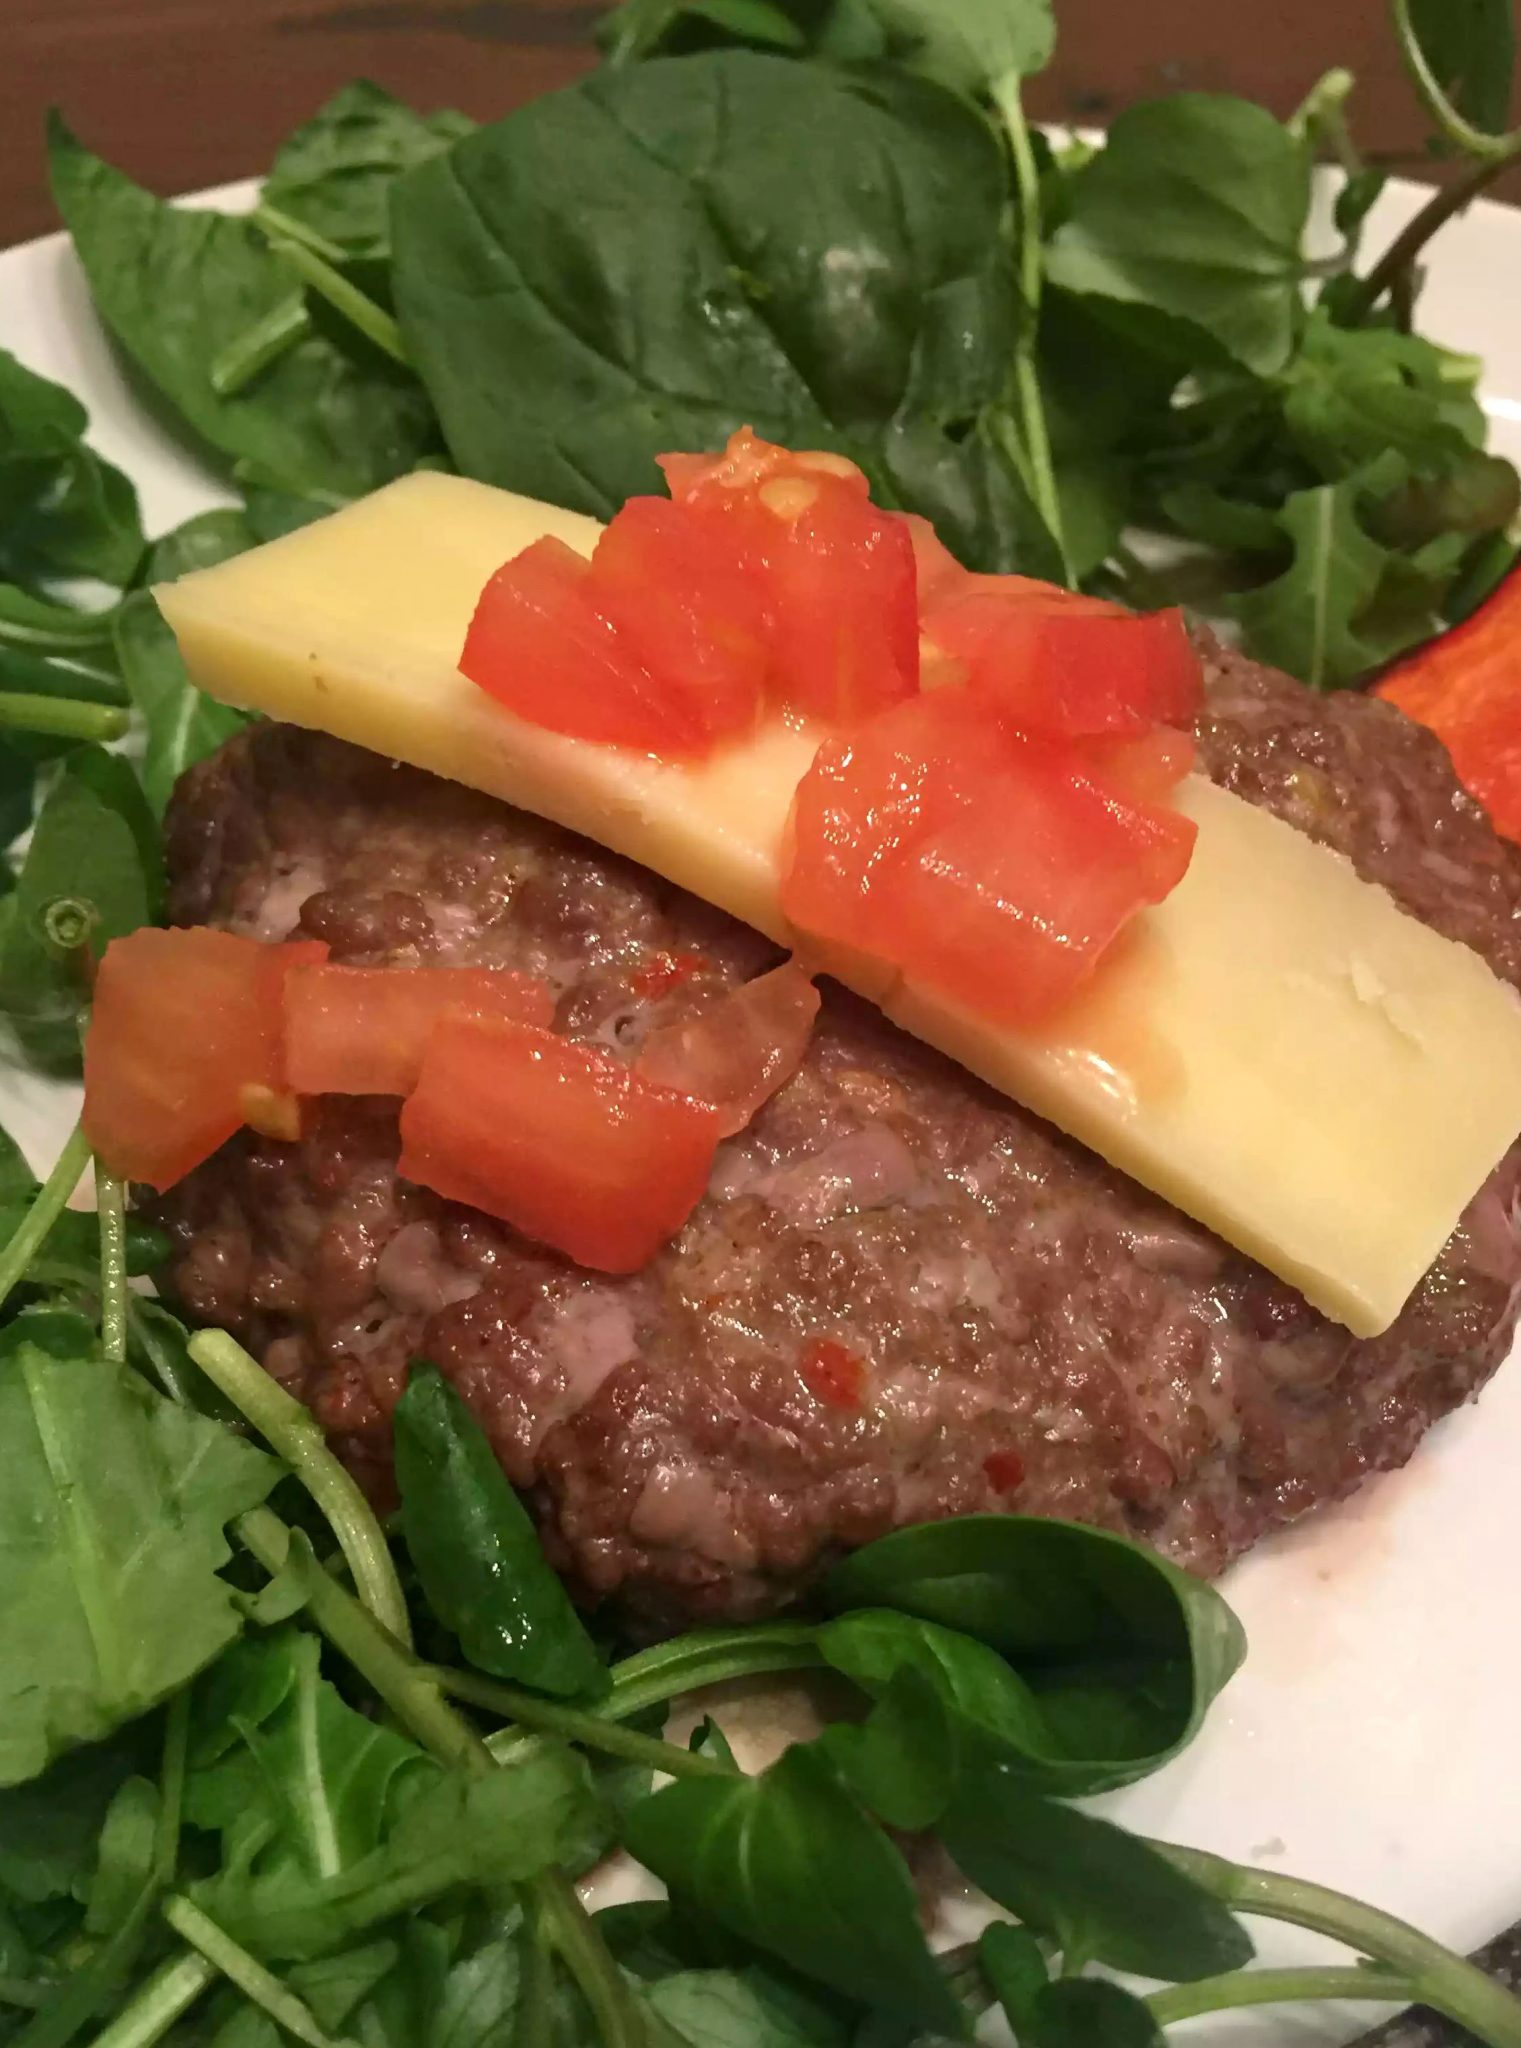 Super Simple Spicy Burgers (Chilli & Garlic by Emma Eats & Explores - SCD, Paleo, Grain-Free, gluten-Free, Dairy-Free, Clean Eating